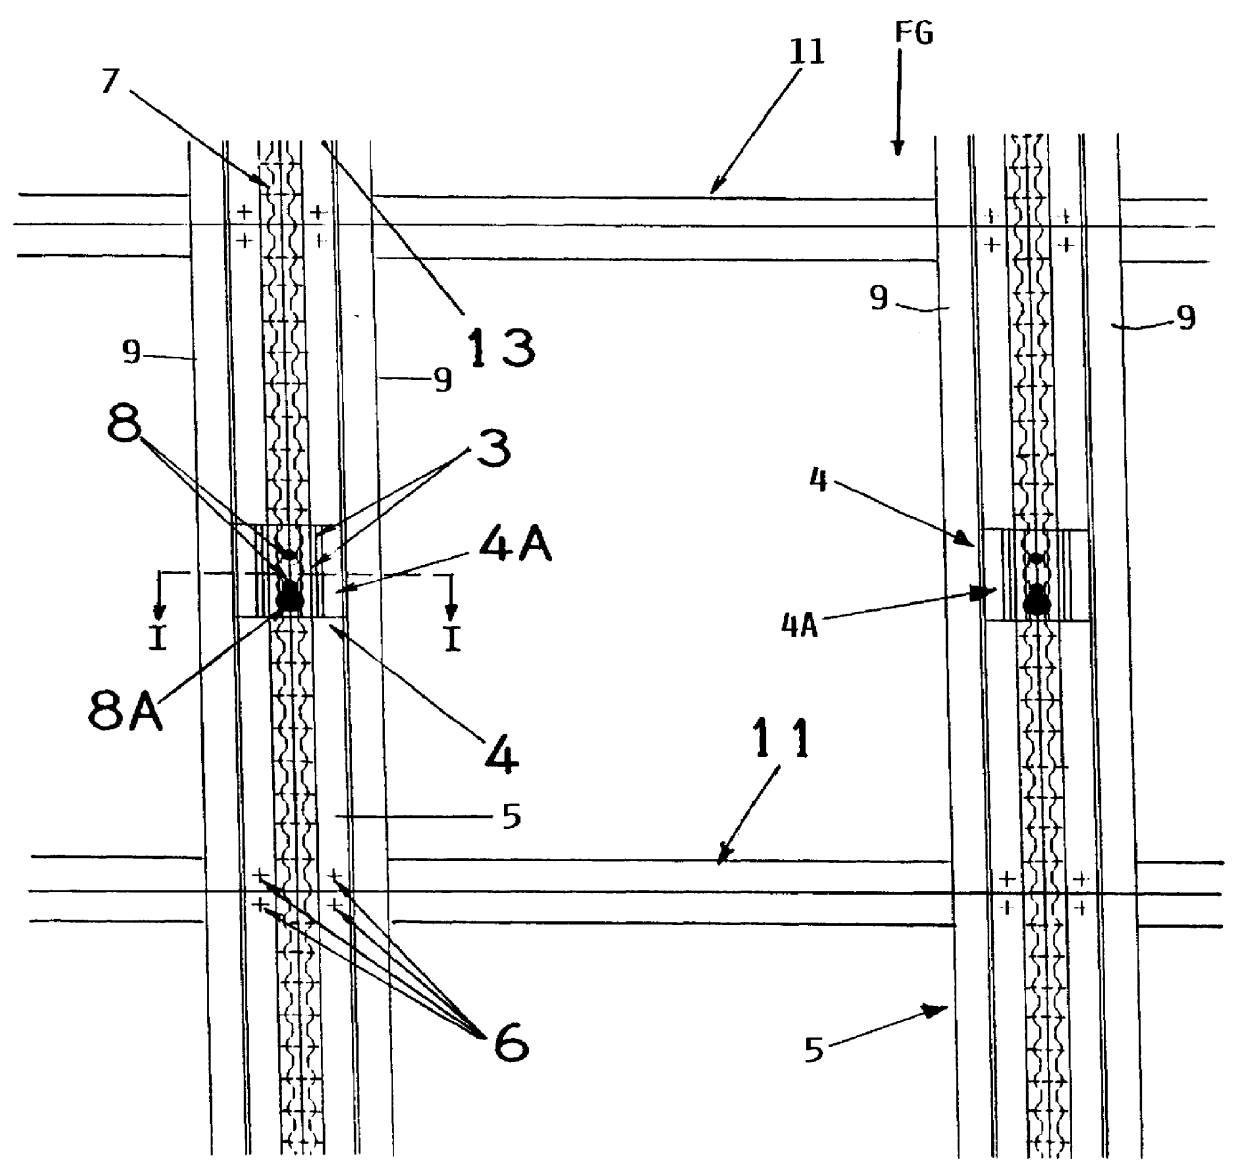 System for securing a support to an aircraft floor